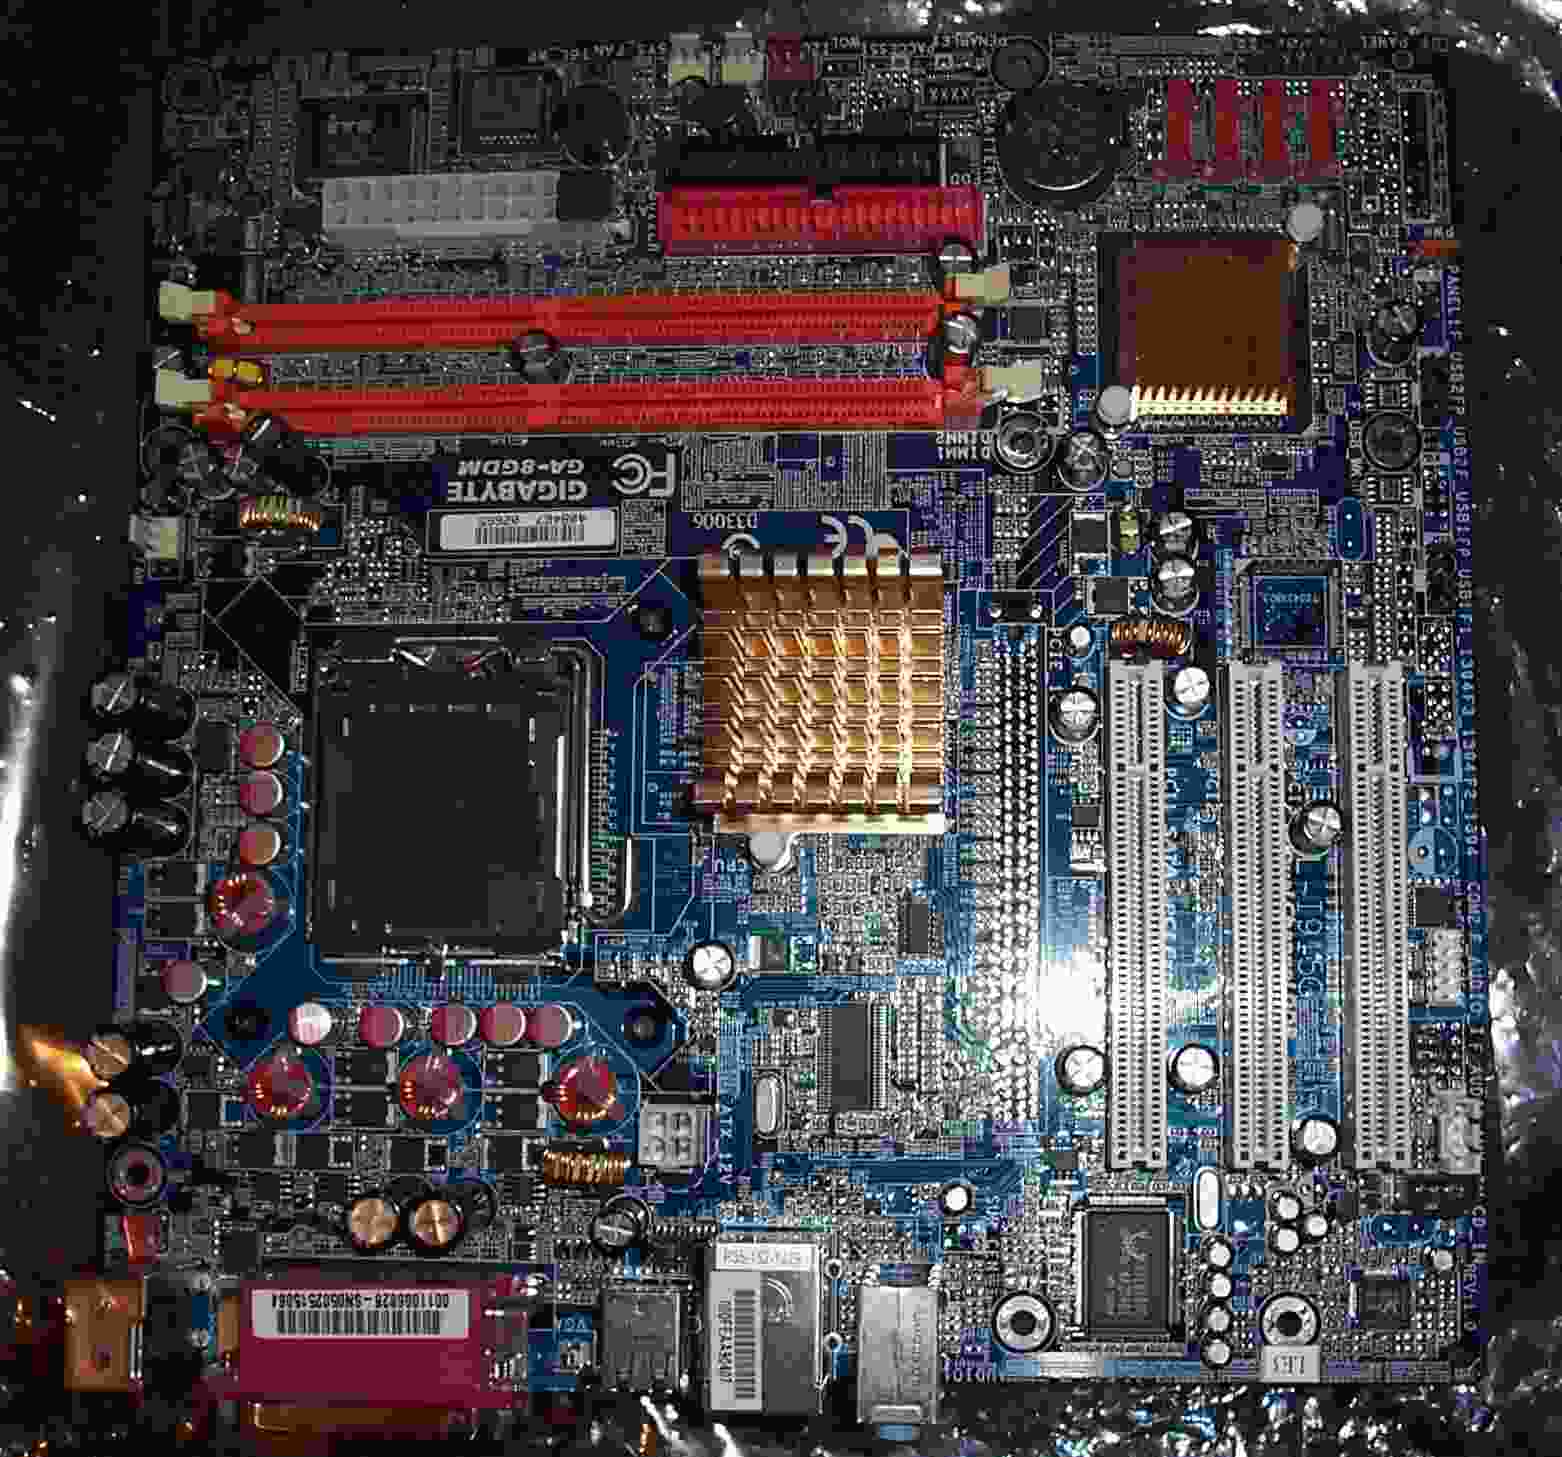 Ixbt Labs Gigabyte 780sli Ds5 A Motherboard Based On The Nvidia